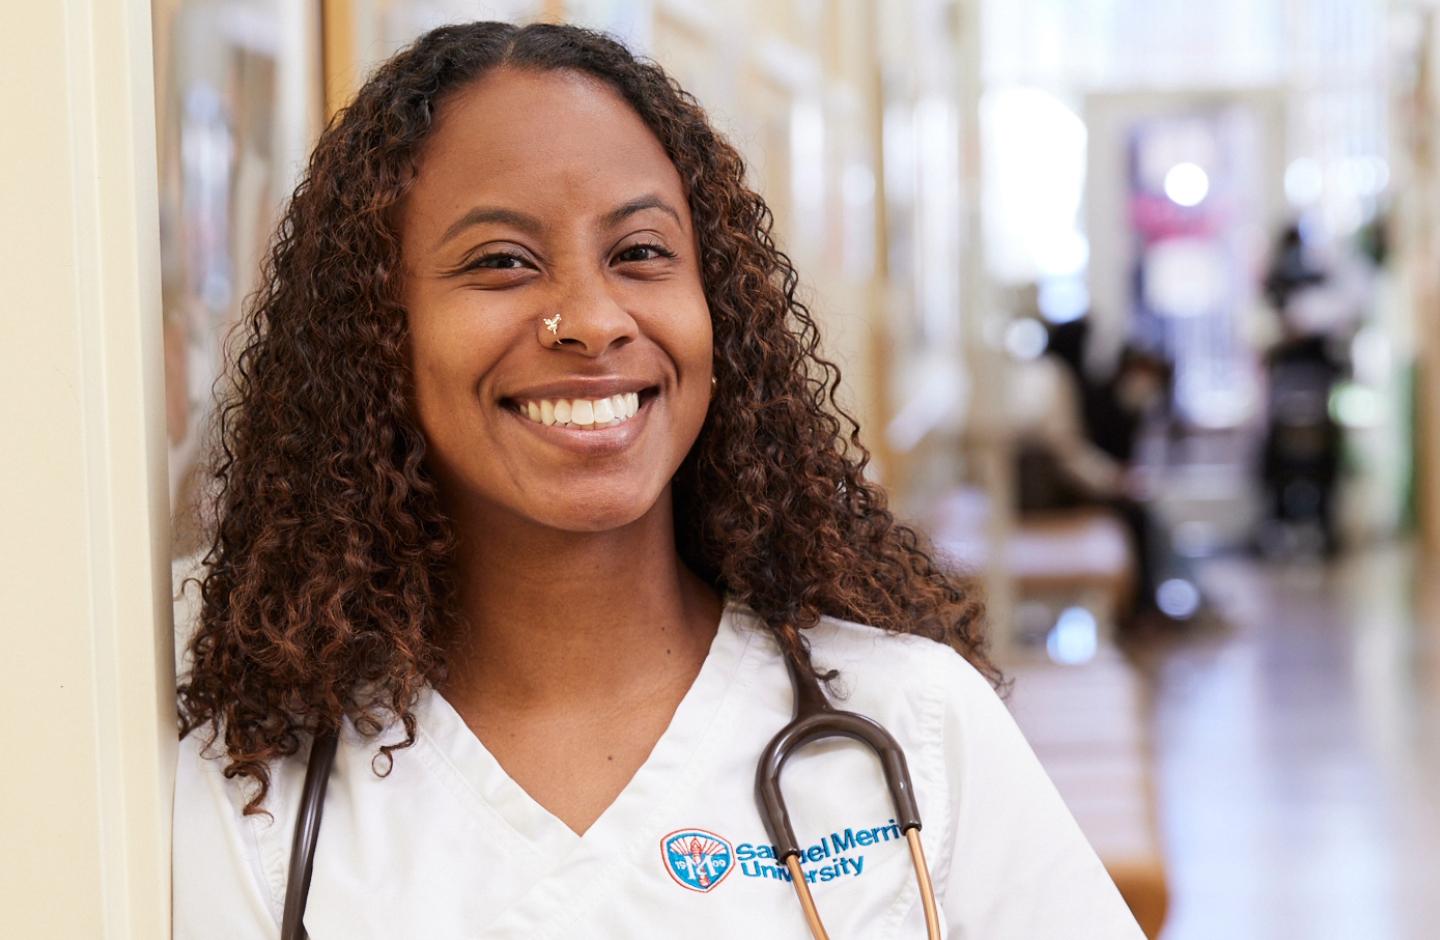 Smiling student standing in hallway of clinic